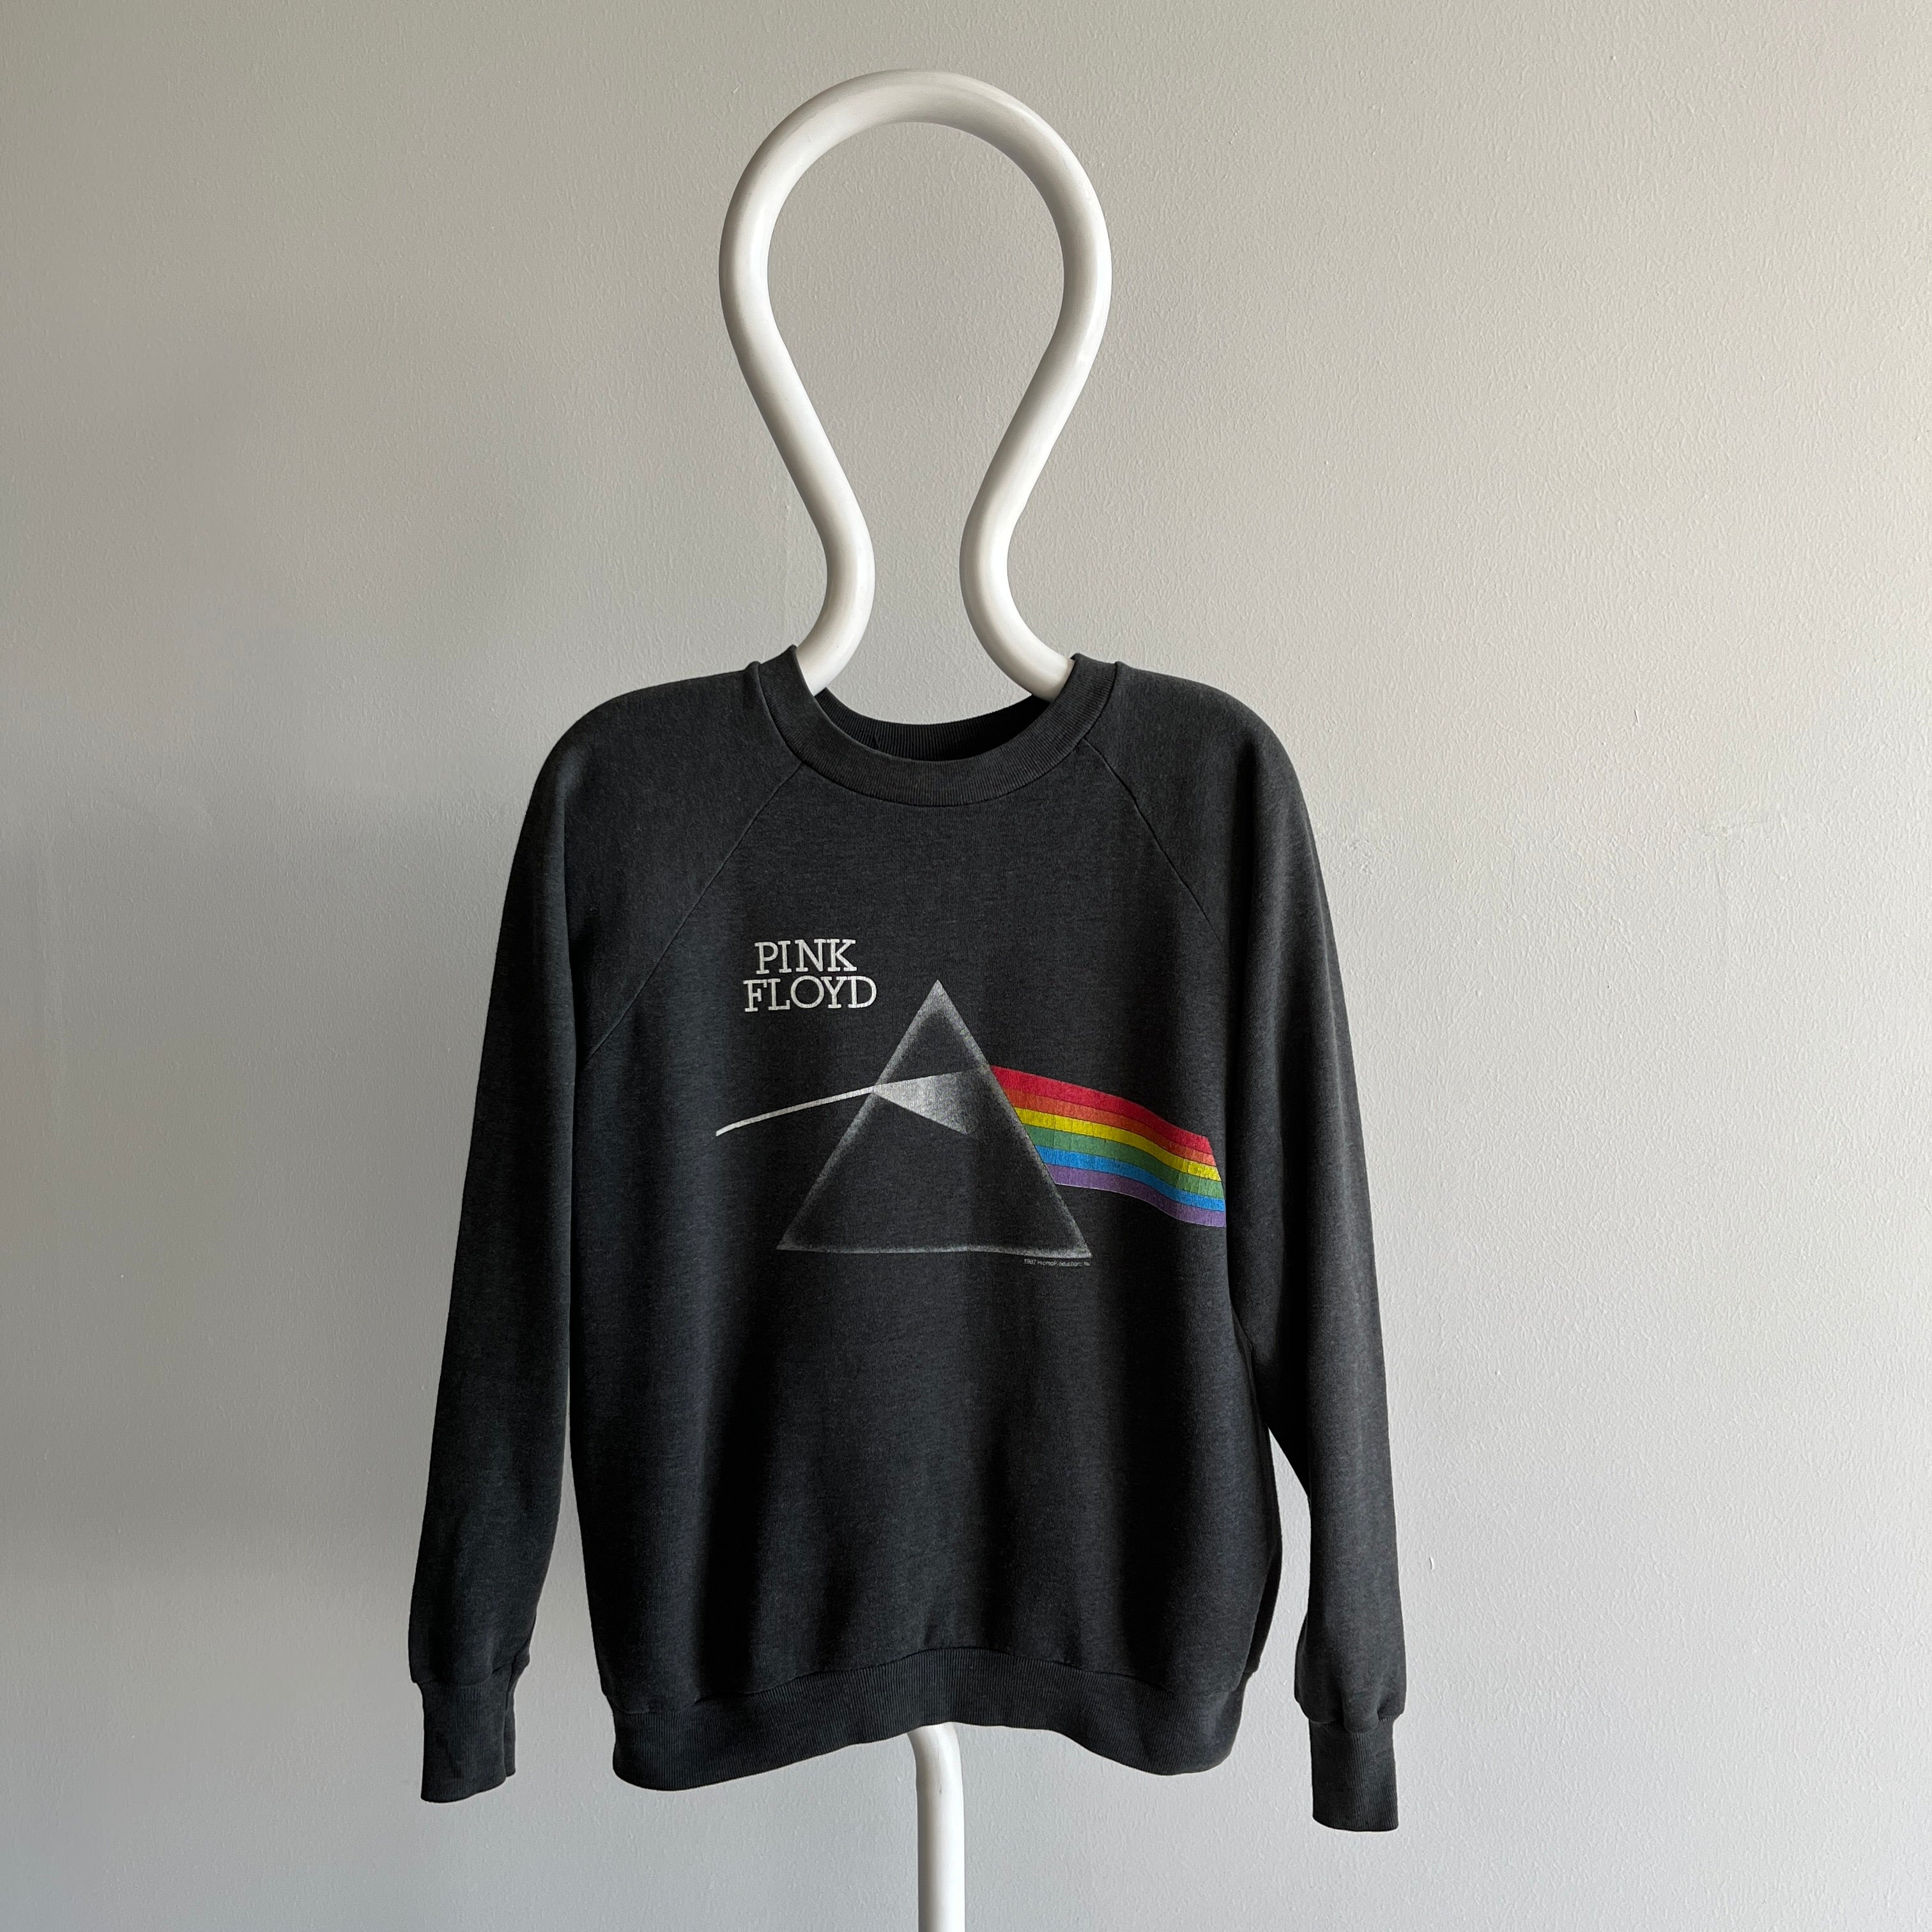 1987 Pink Floyd Front and Back Tour Sweatshirt on a Healthknit !!!